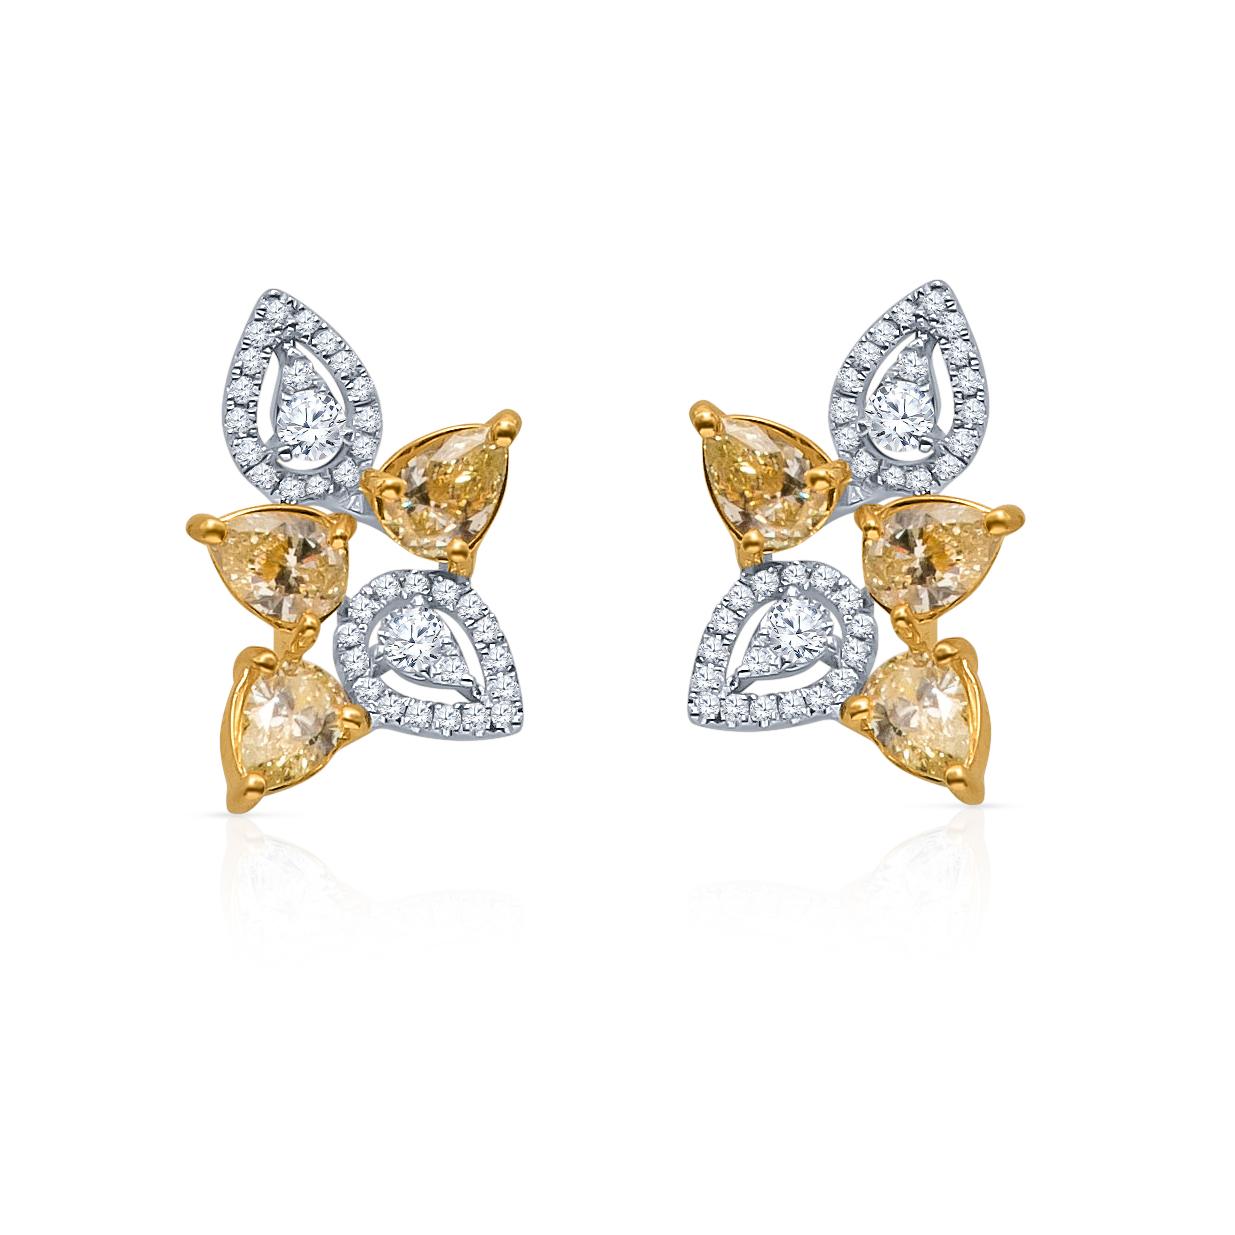 18kt white and yellow gold earrings with 0.97 carats total weight in pear shaped yellow diamonds and 0.27 carat total weight in pear shaped and round brilliant cut white diamonds, with friction posts and backs. This lovely floral design can be worn